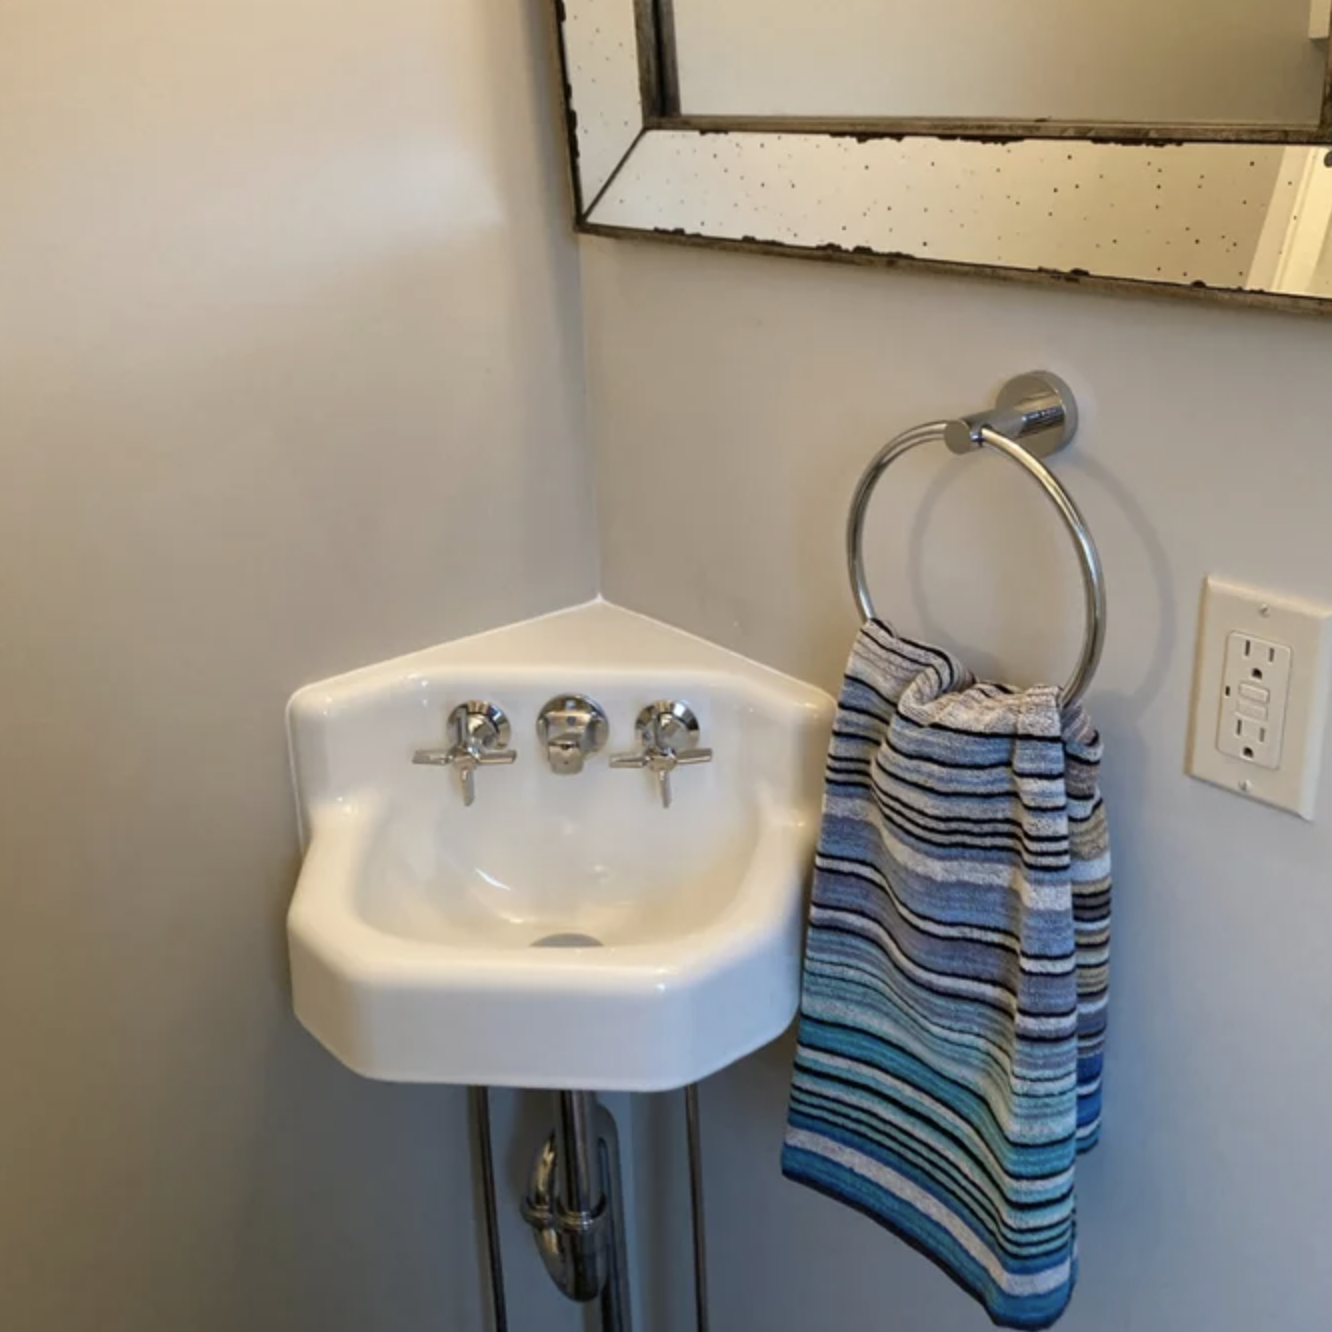 A silver towel ring with a towel hanging from it